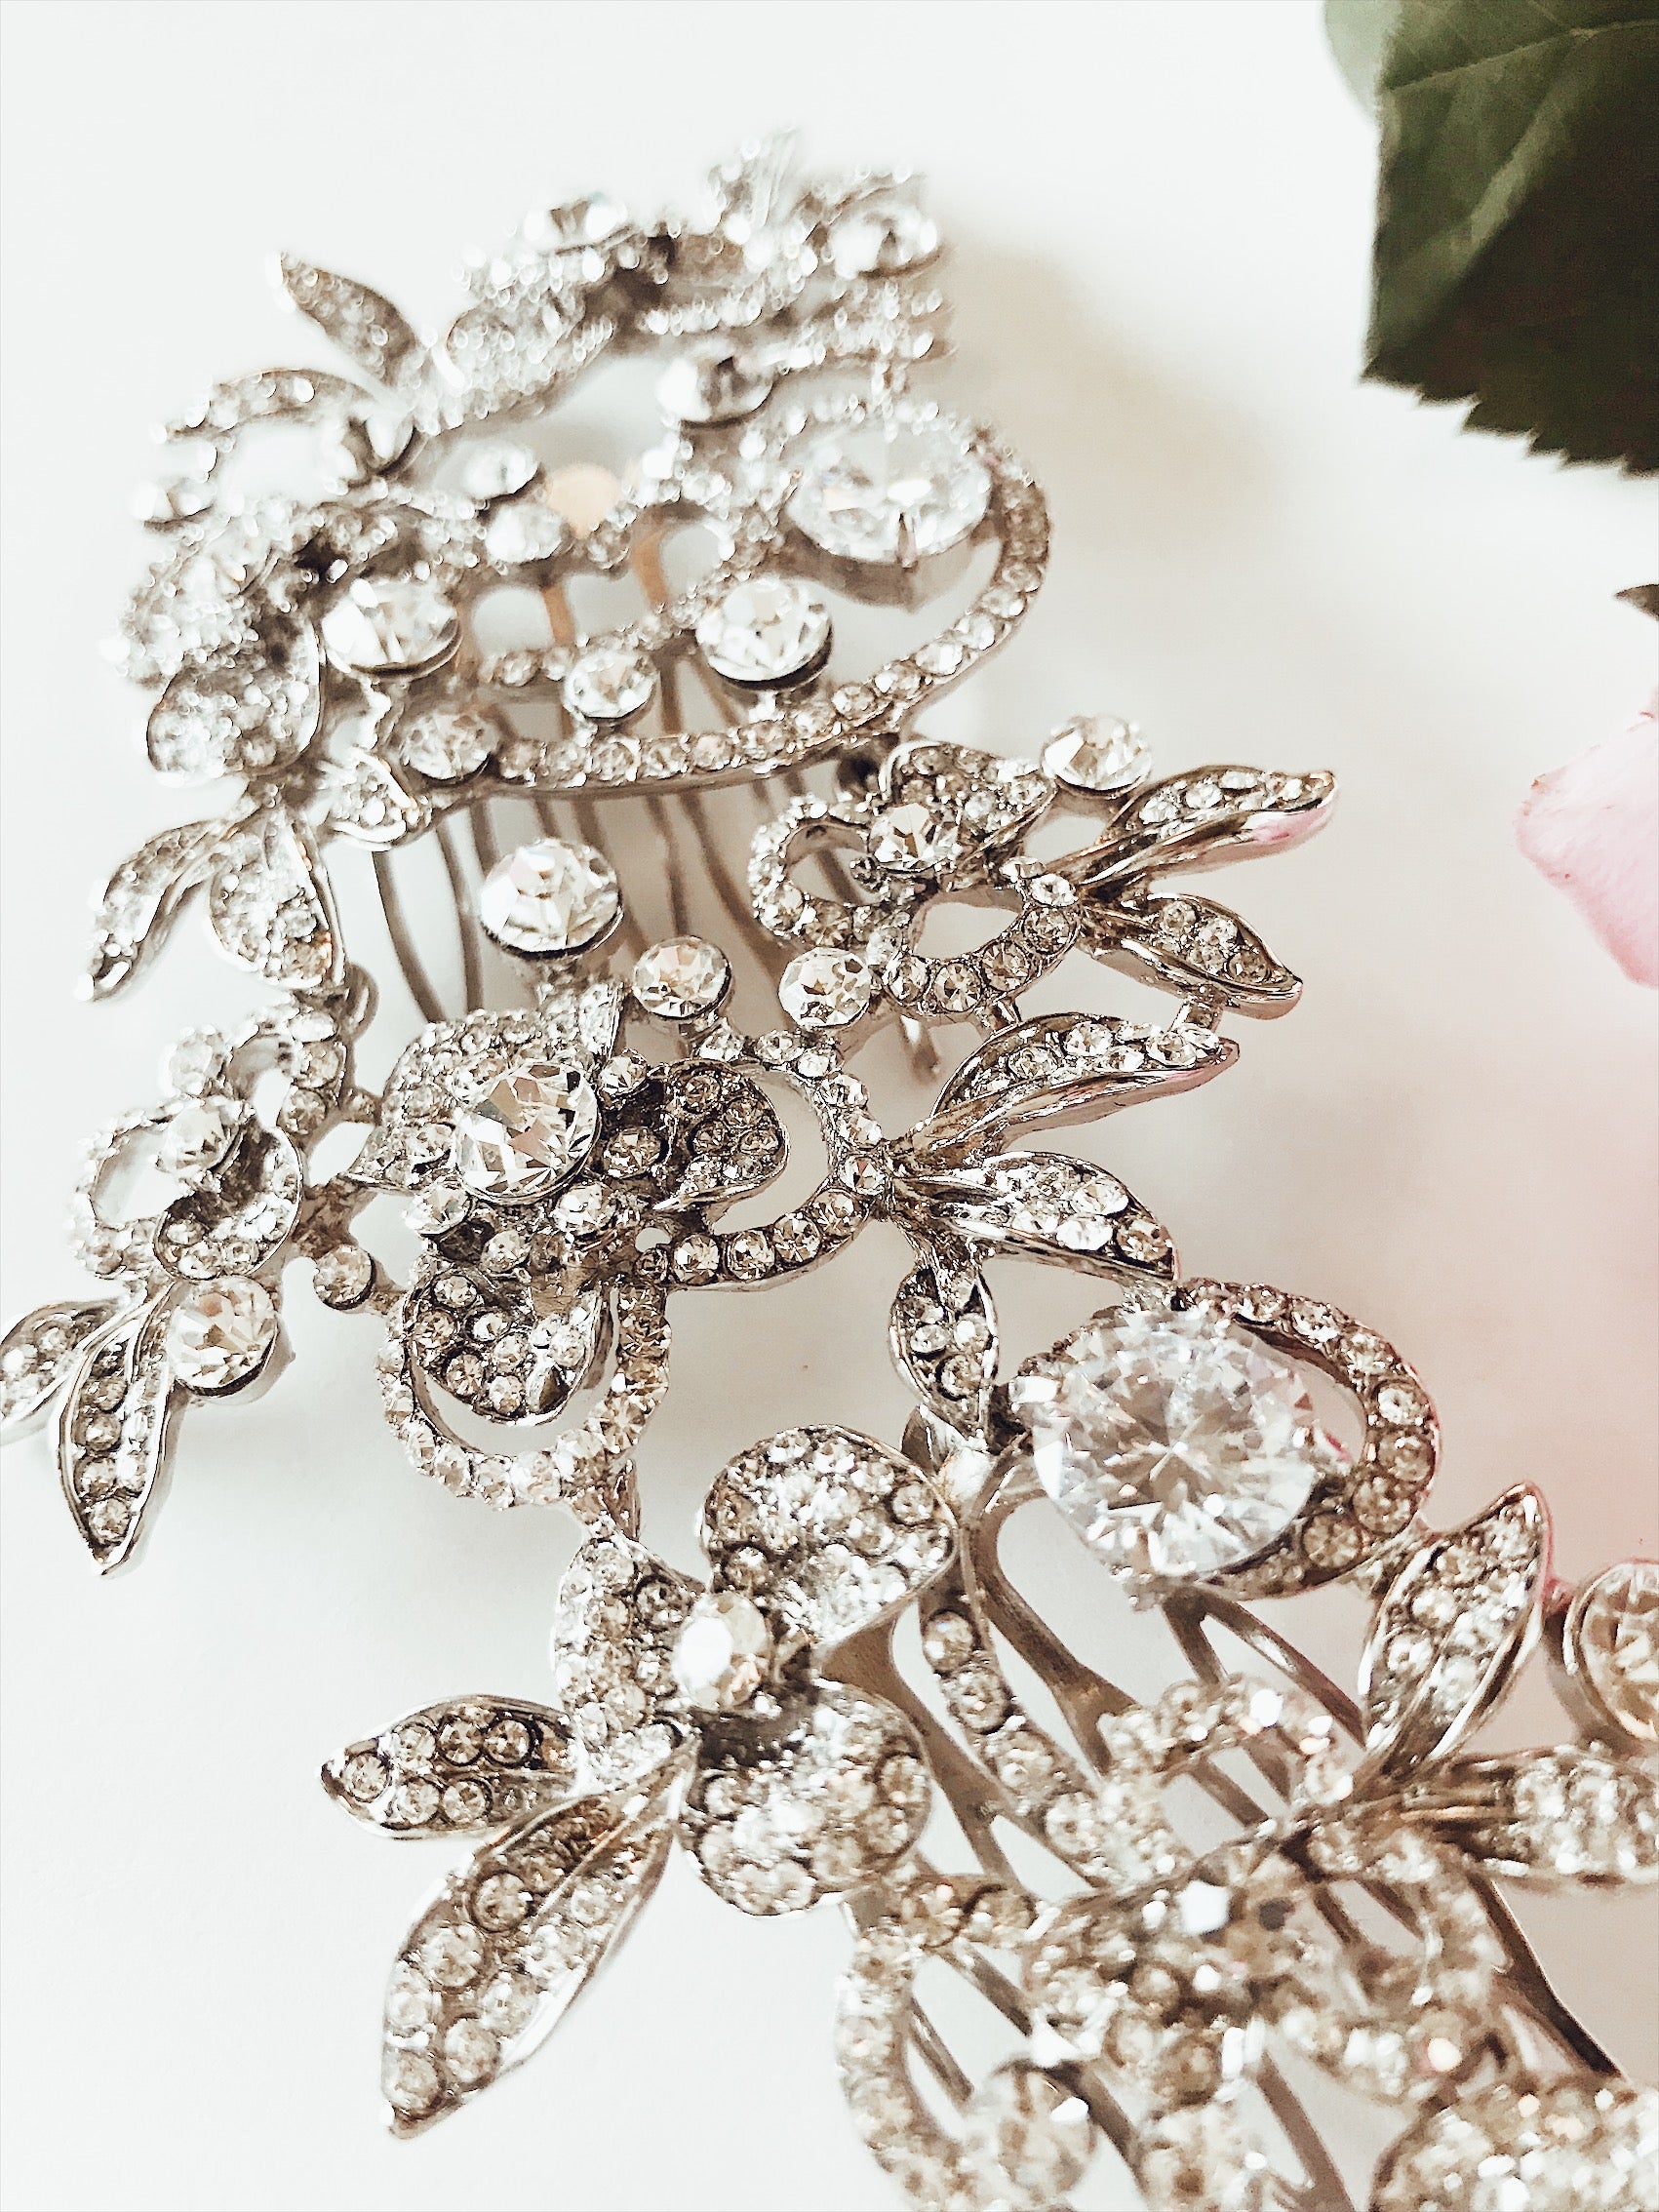 Crystal encrusted bridal hair comb with art-deco patterning by Lauren Elaine Bridal Accessories